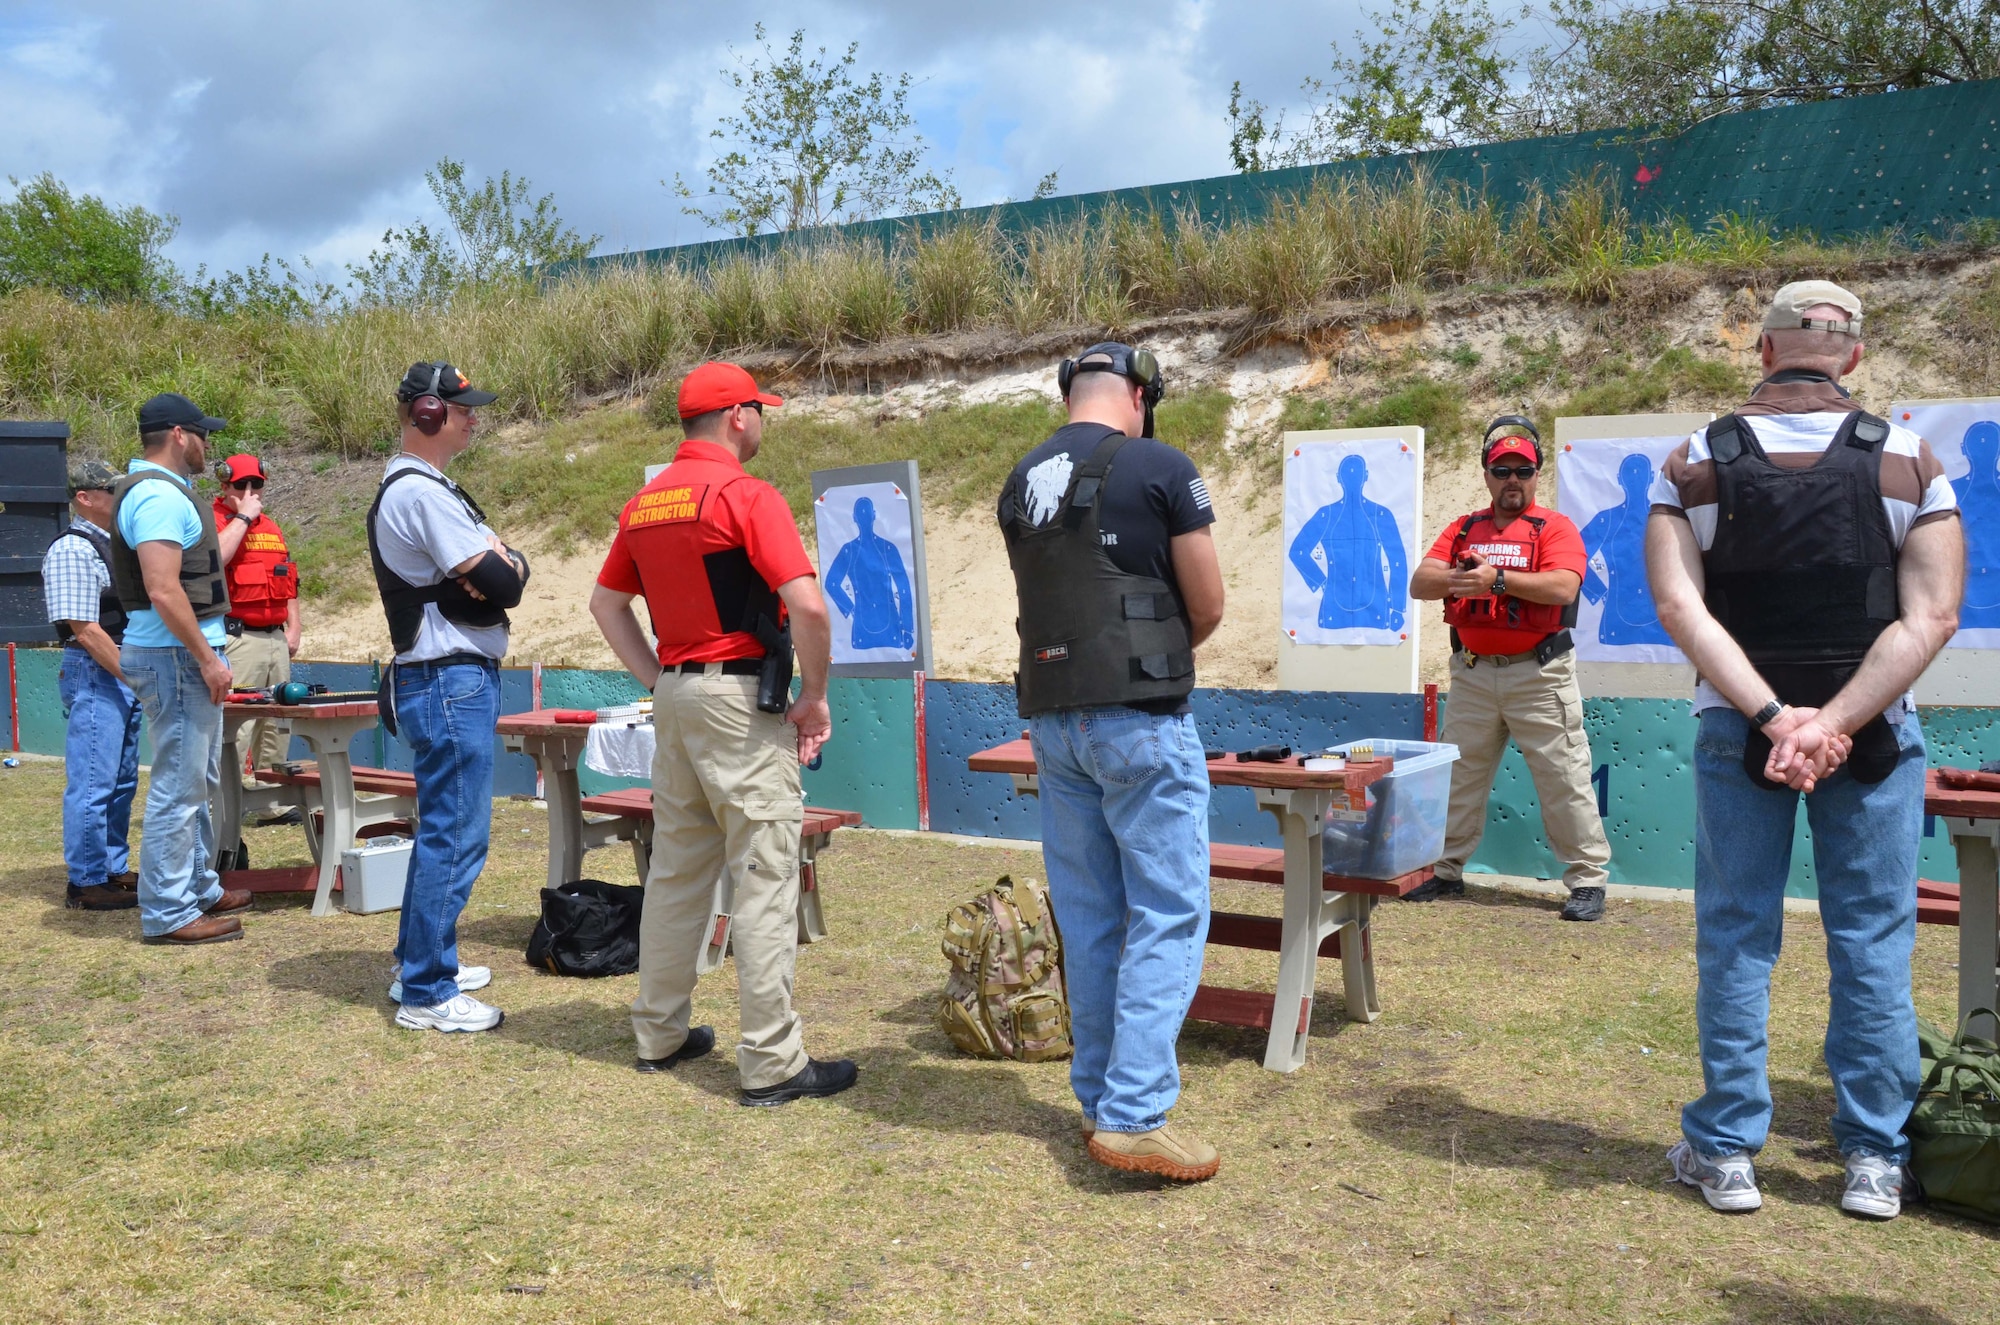 Members of the Air Force Technical Applications Center, Patrick AFB, Fla., listen to master lead instructor Larry Plotkin (second from right) give instructions on how to stand during the live fire portion of the Brevard County Sheriff’s Office’s Self Defense Through Tactical Shooting and Decision Making course March 25, 2017. (U.S. Air Force photo by Susan A. Romano)